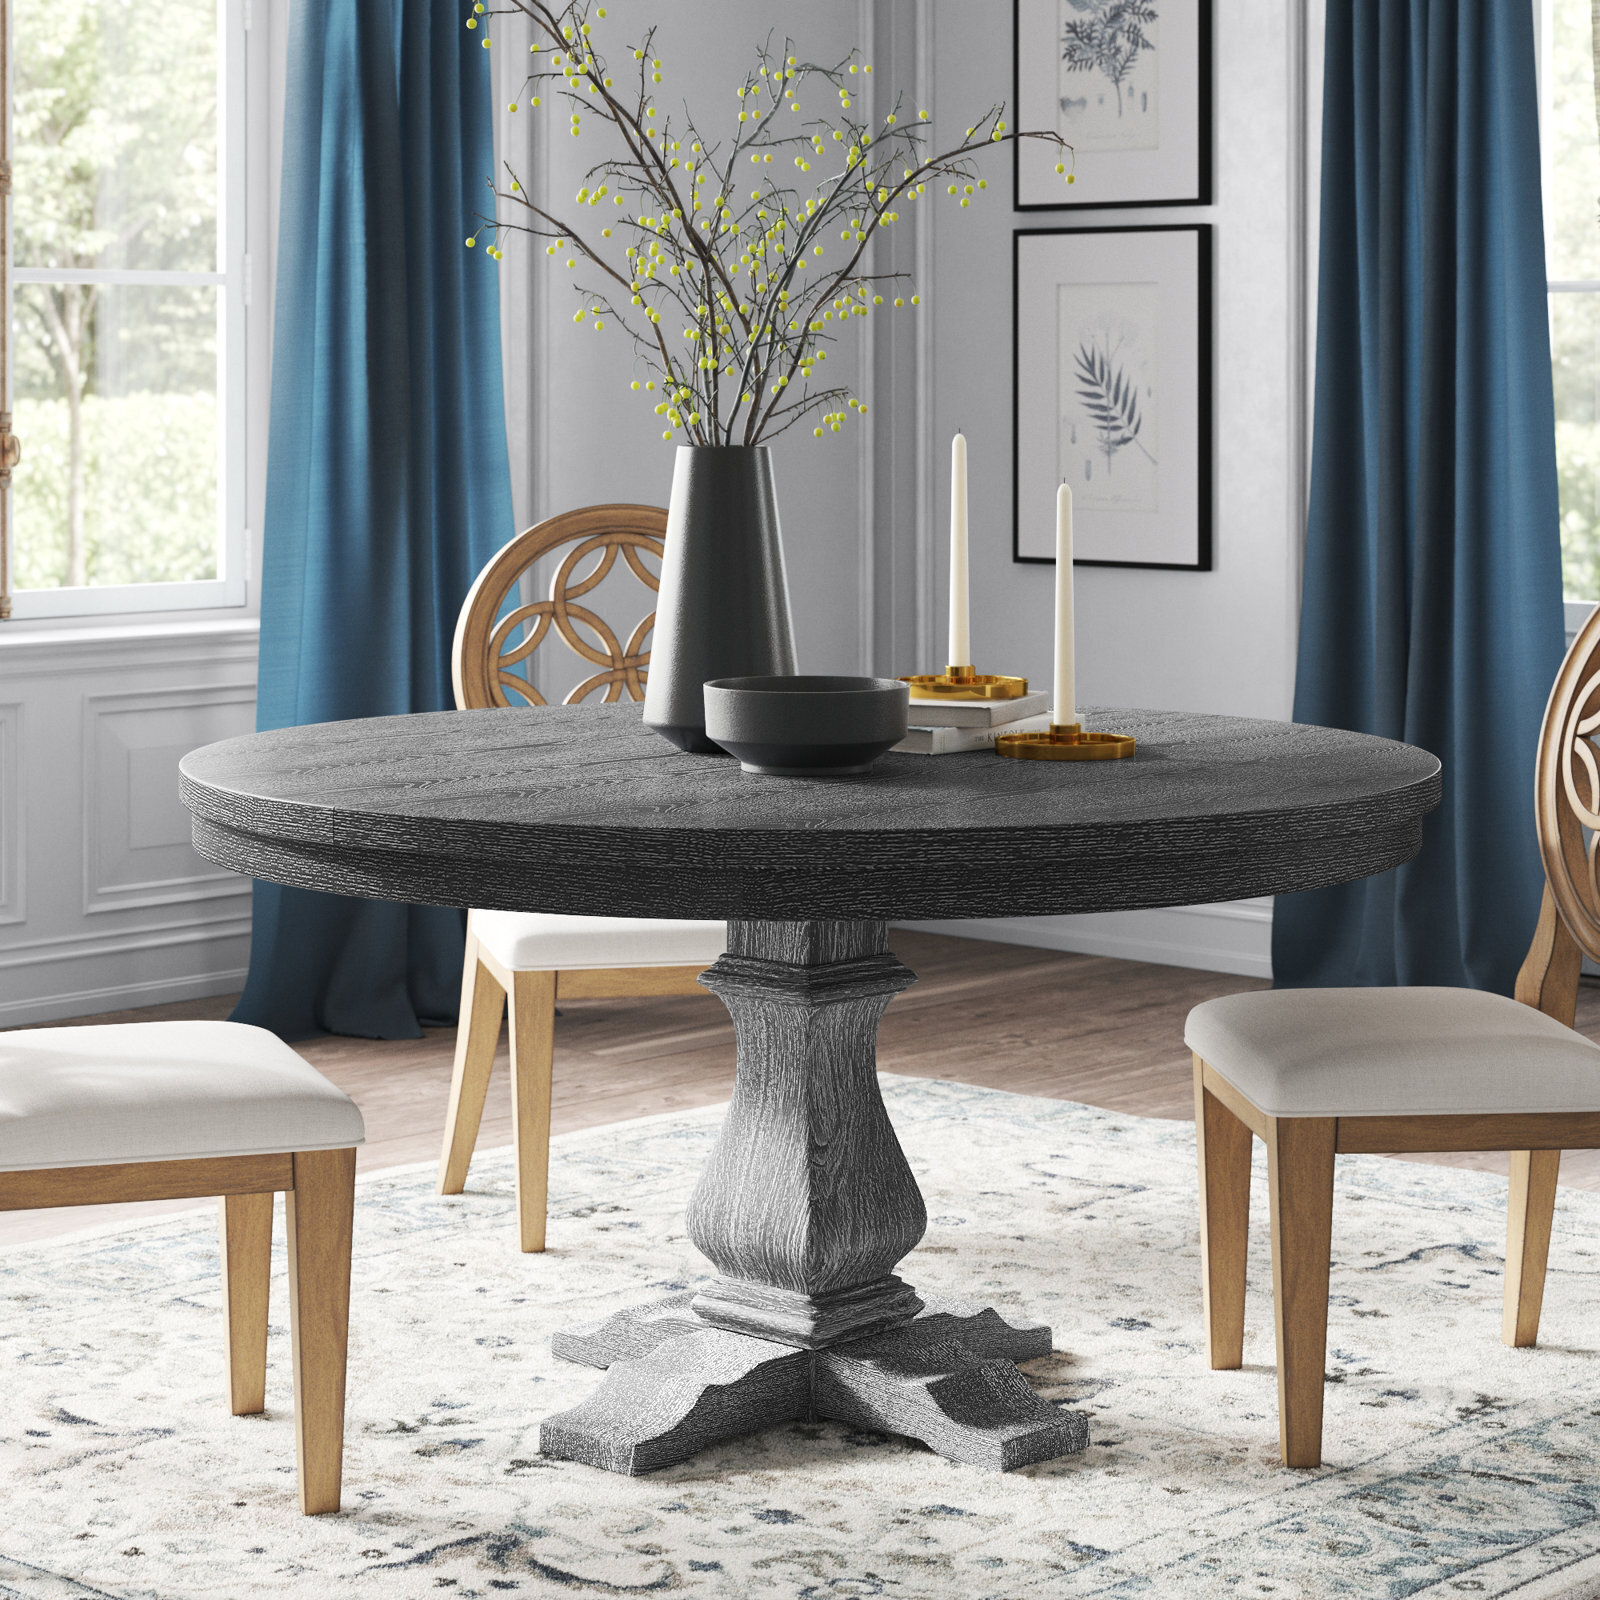 Large Round Dining Tables Seats 10 - Foter